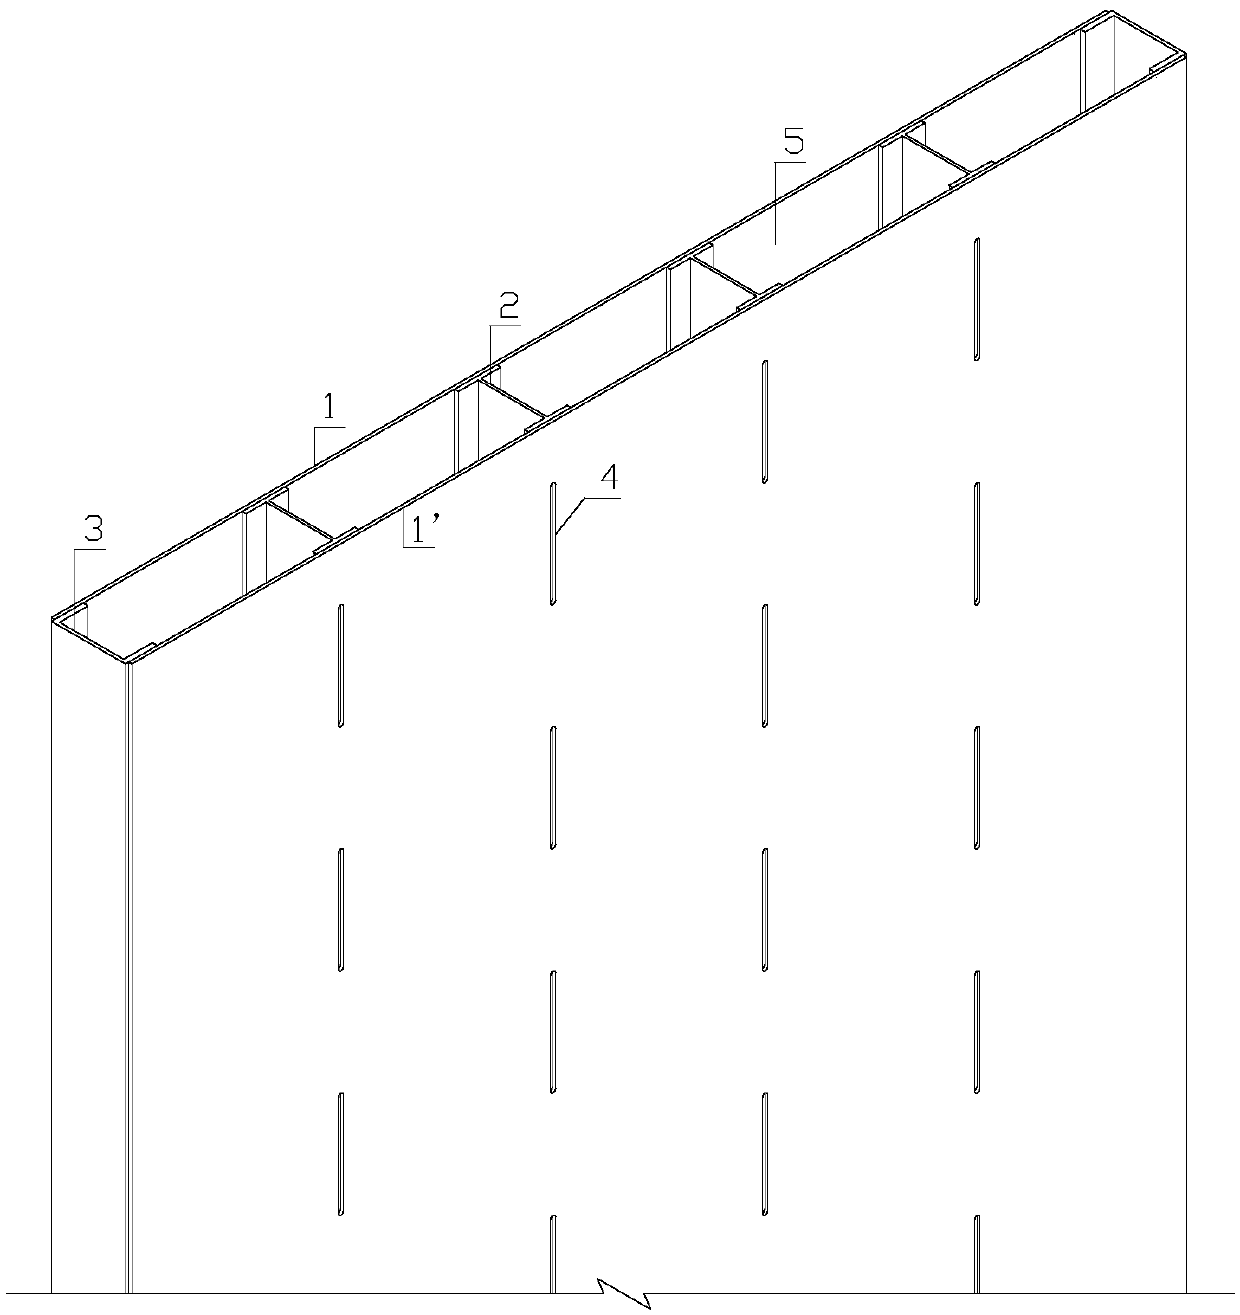 Fabricated shear wall structure in combination of steel plates and section steel